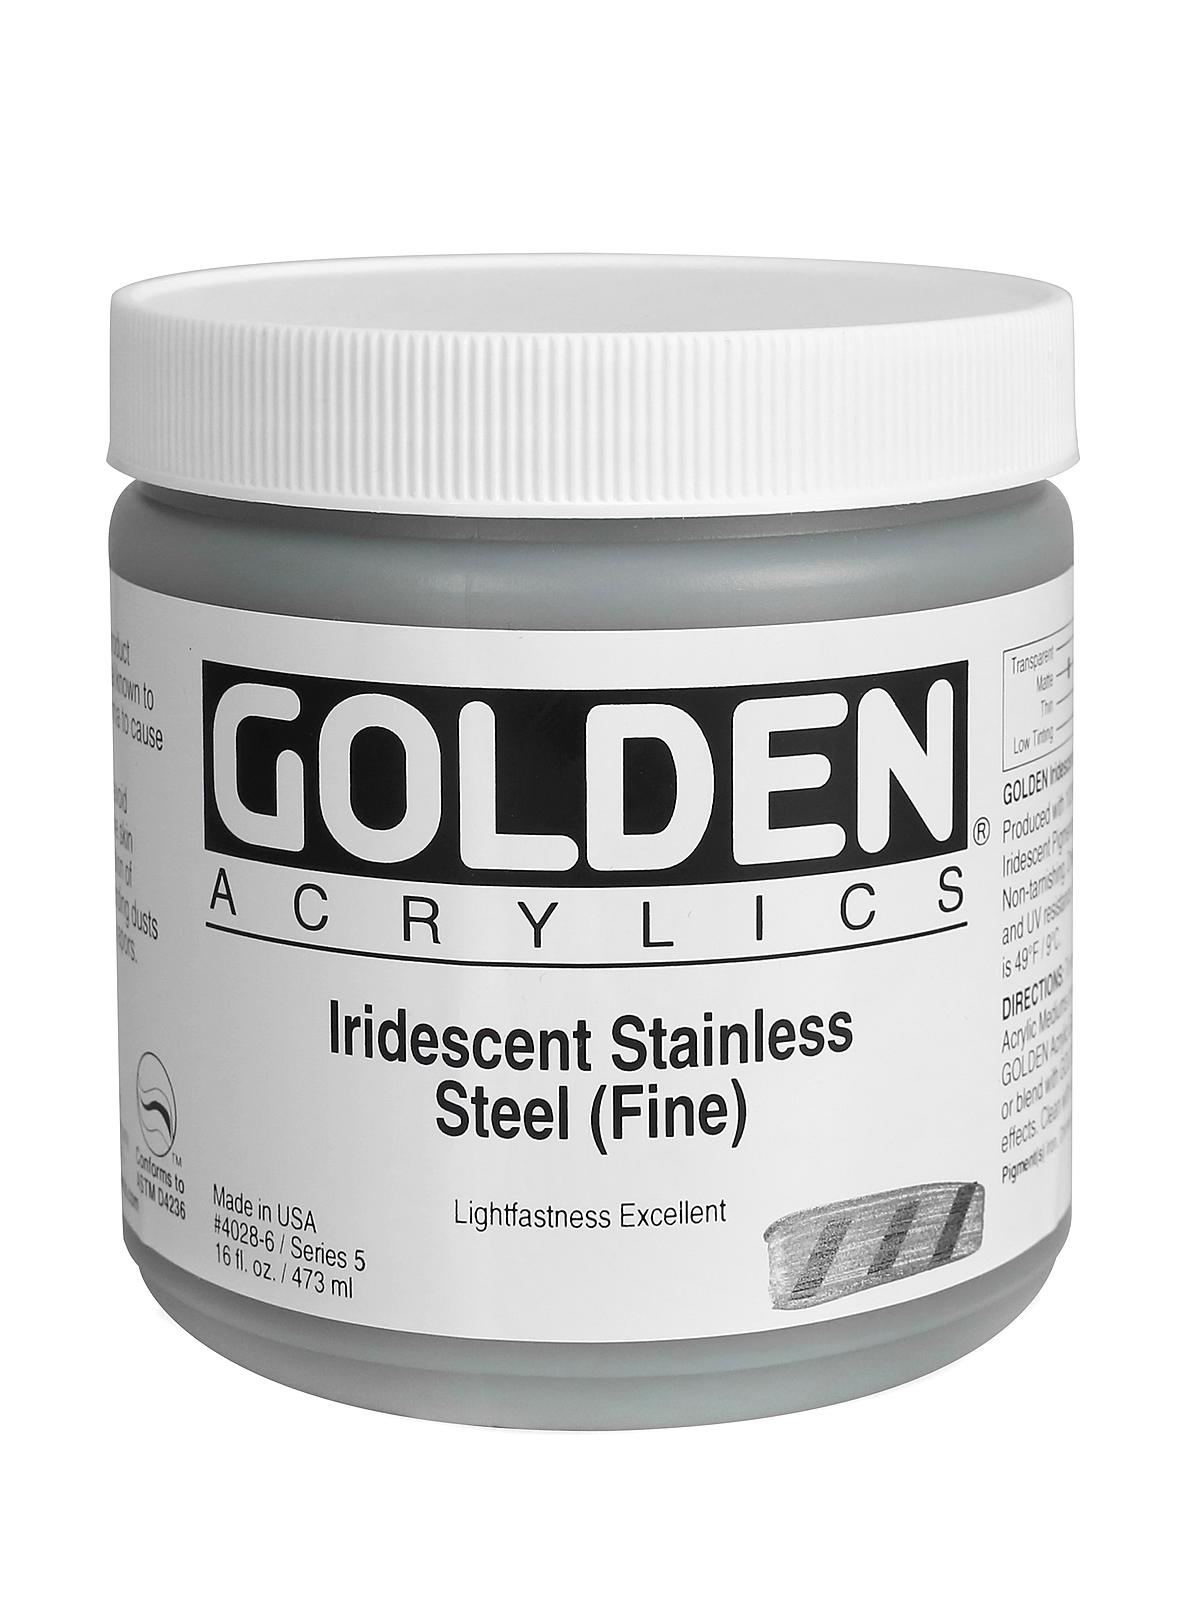 Iridescent And Interference Acrylics Iridescent Stainless Steel Fine 16 Oz.